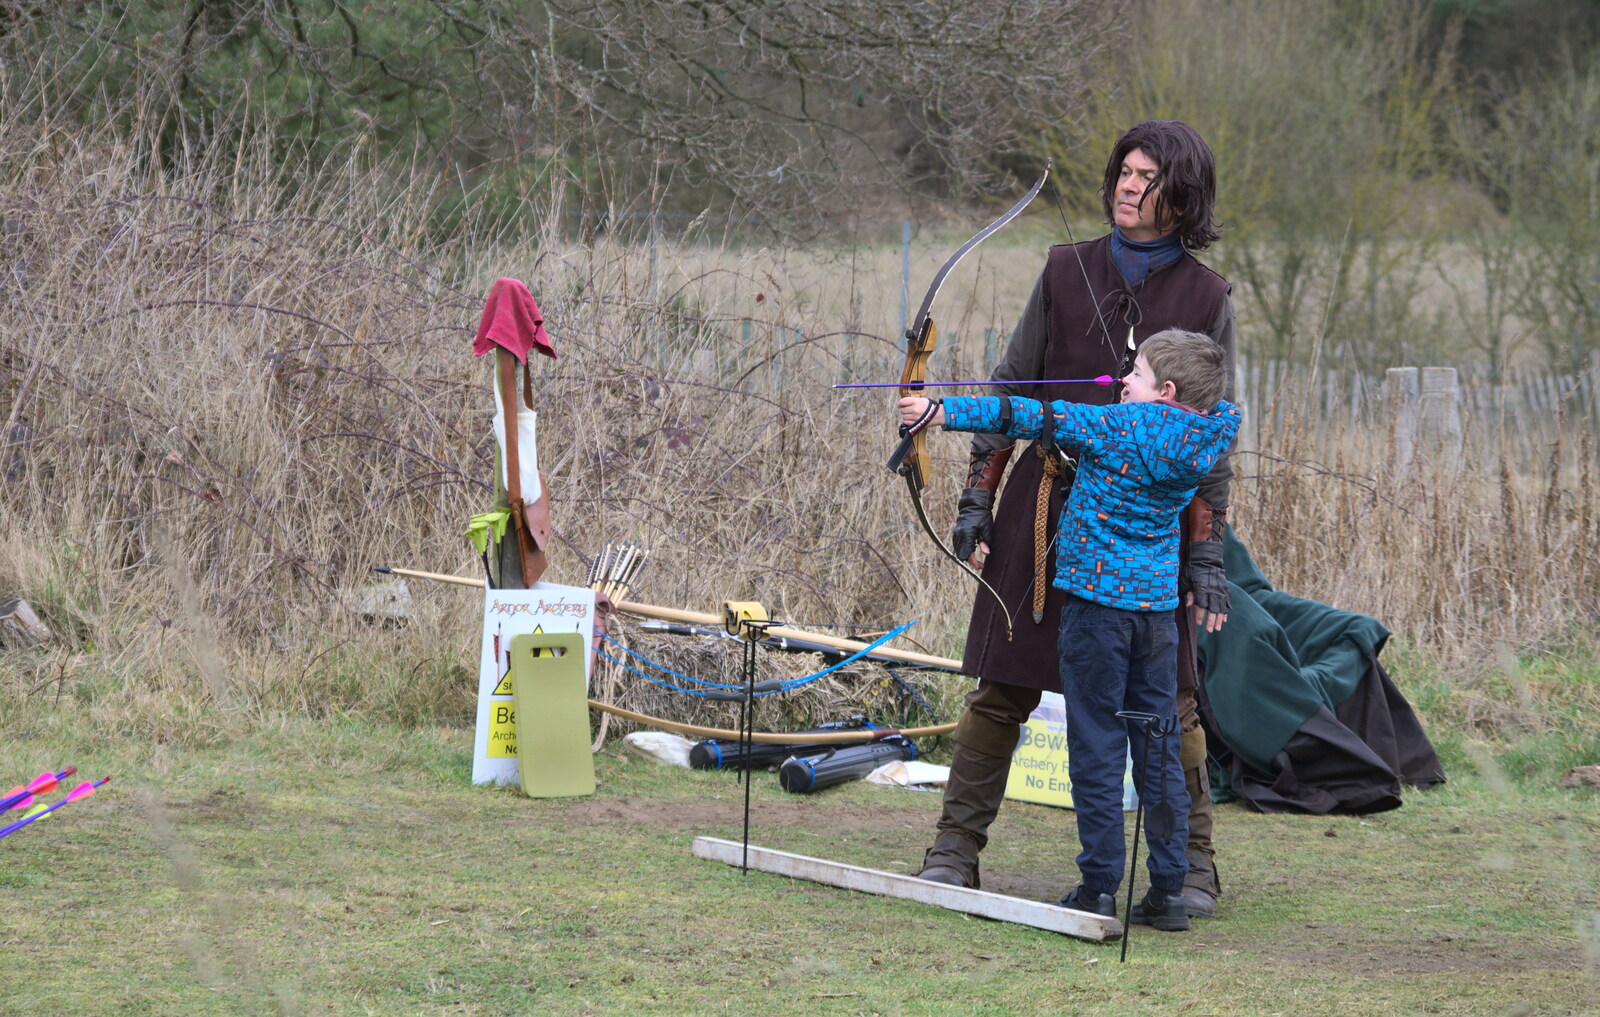 Fred takes aim from An Anglo-Saxon Village, West Stow, Suffolk - 19th February 2017